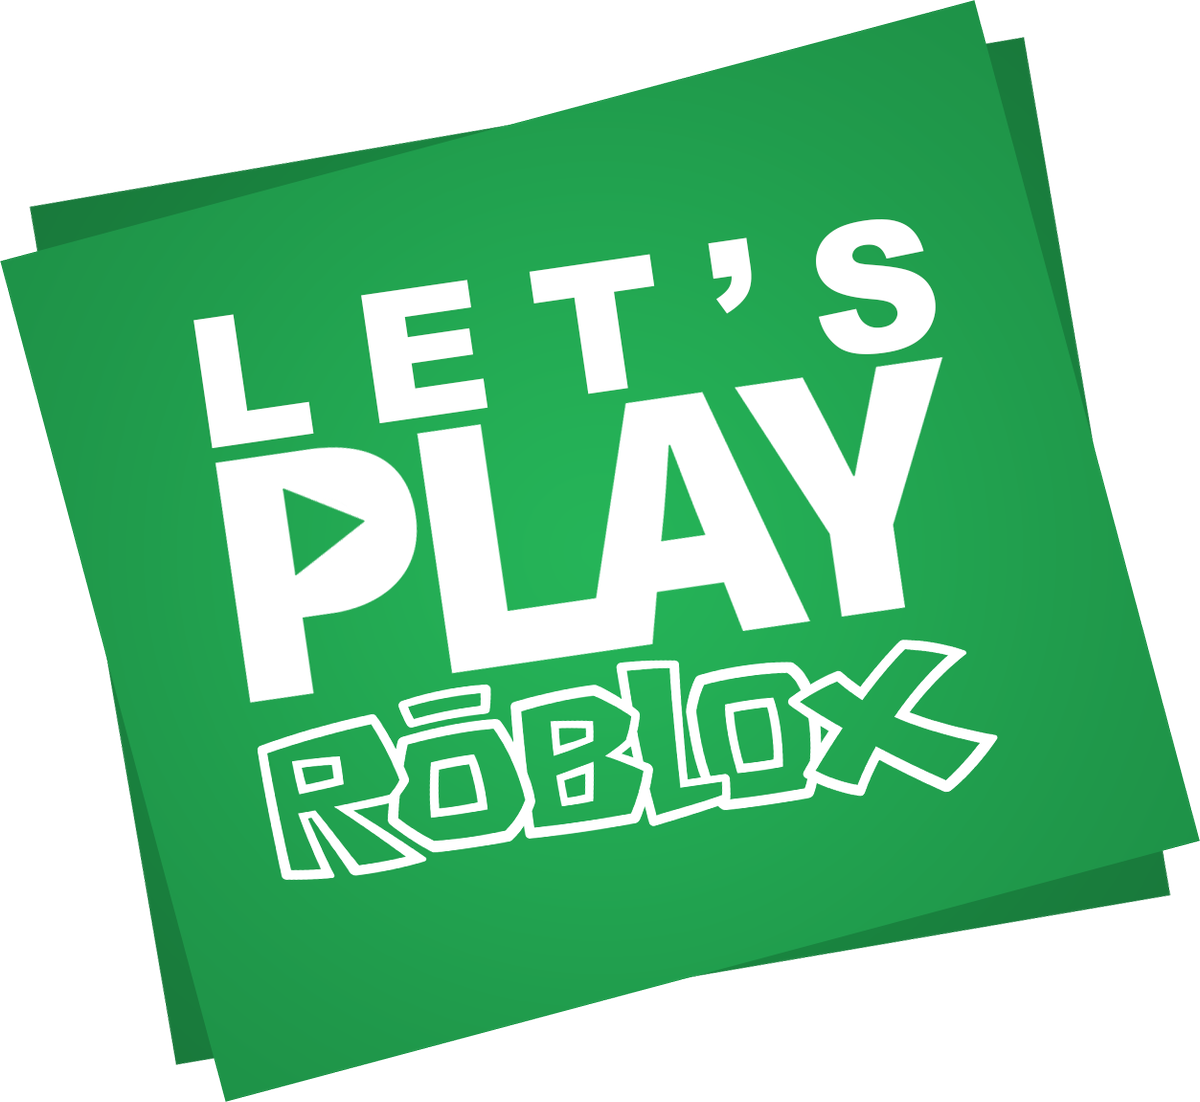 Roblox On Twitter Roll Initiative Time For Rpg Adventures Watch Letsplayroblox As They Delve Into Rpg Games On Roblox At 2pm Pst Https T Co Jn5ijgaooq Https T Co 2hd8j4cgda